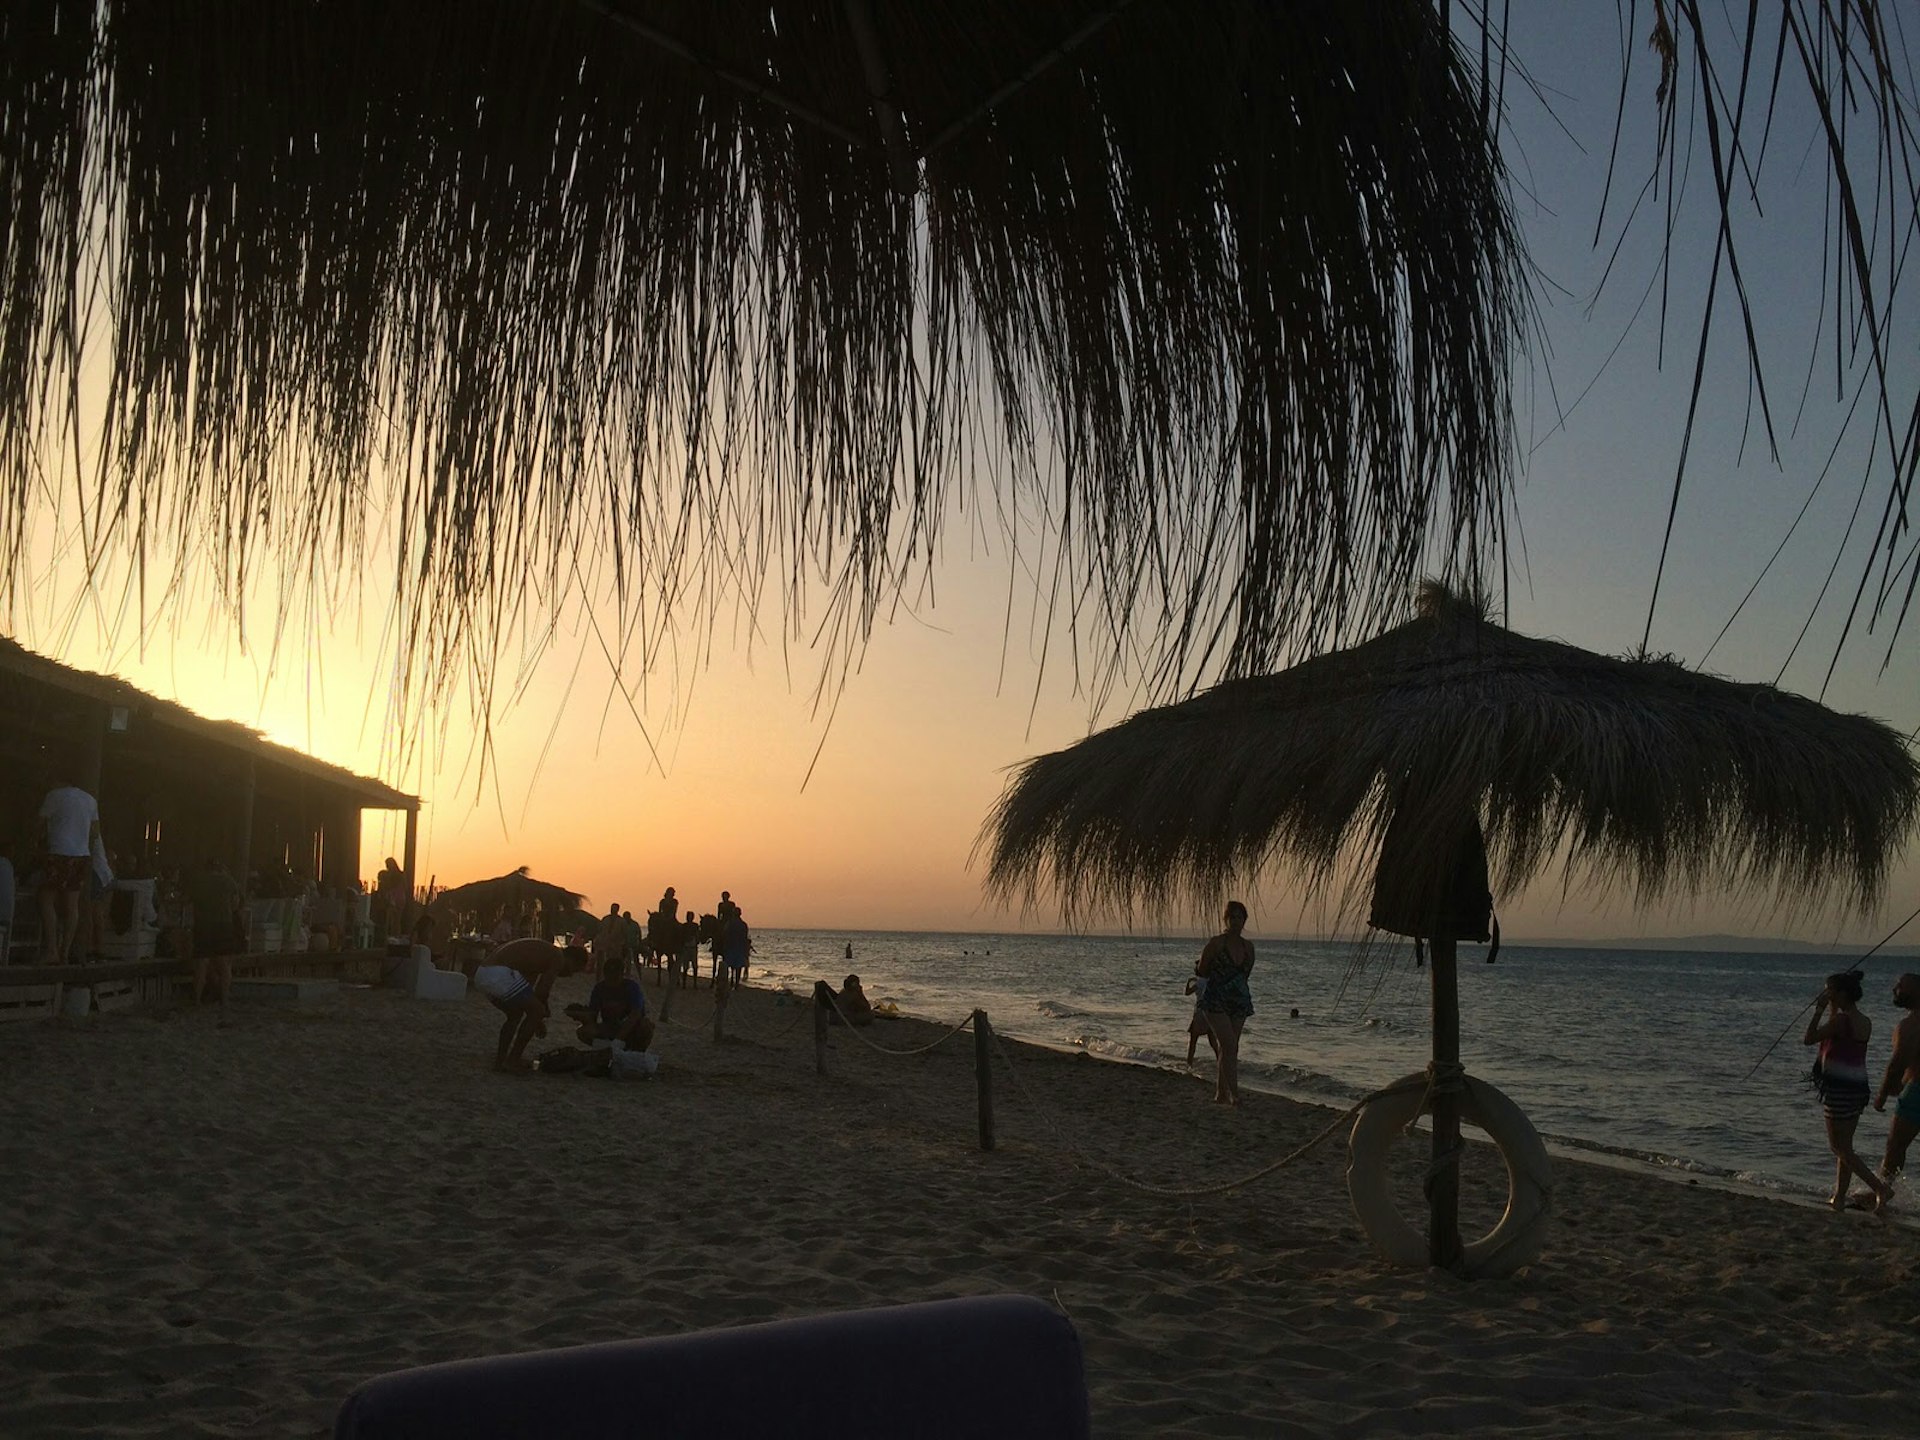 Beach sunset at Chez Franky, Tunis. Image by Erin Harvey / Lonely Planet